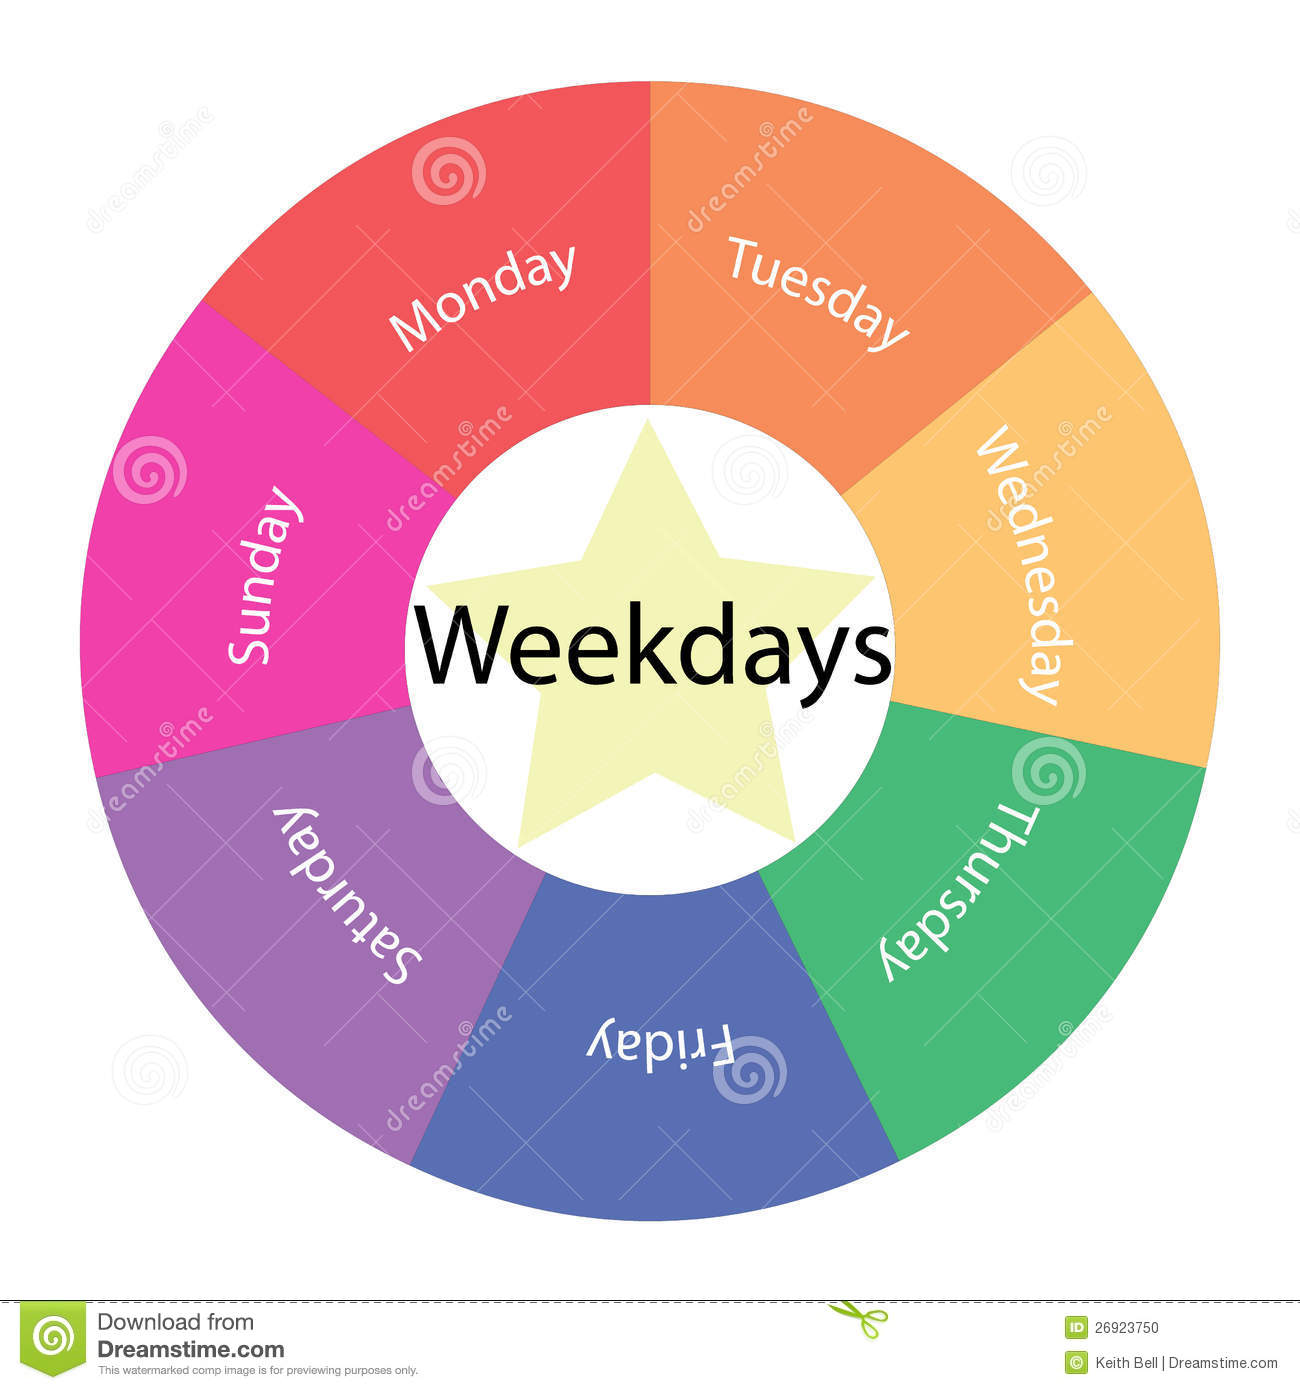 Weekdays Circular Concept With Colors And Star Stock Photo   Image